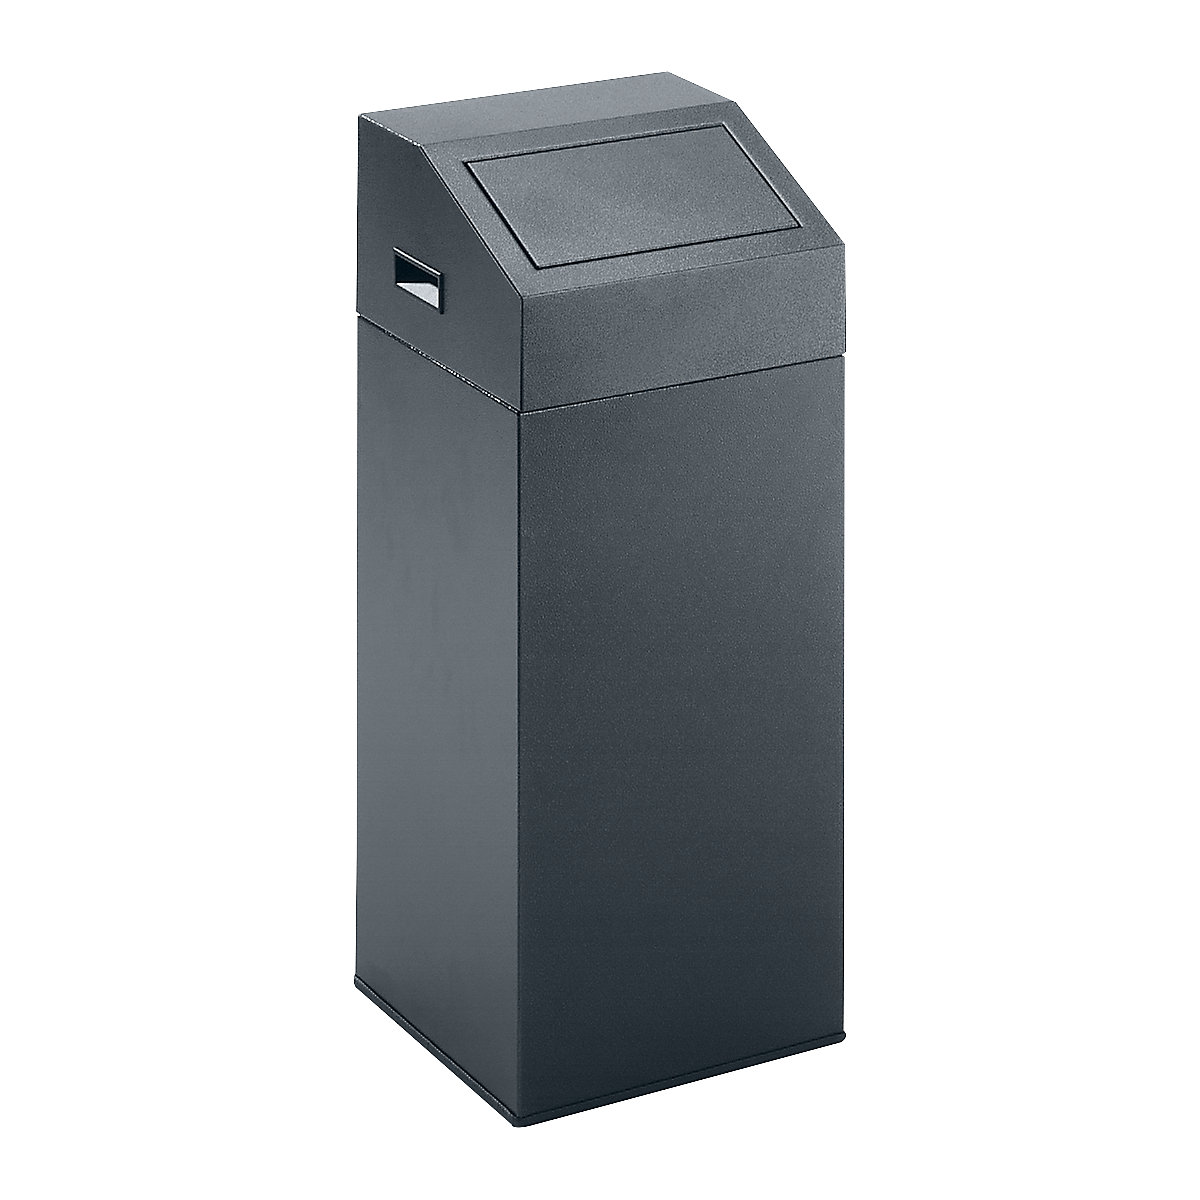 Recyclable waste collector – eurokraft pro, capacity 45 l, WxHxD 320 x 790 x 320 mm, antique silver